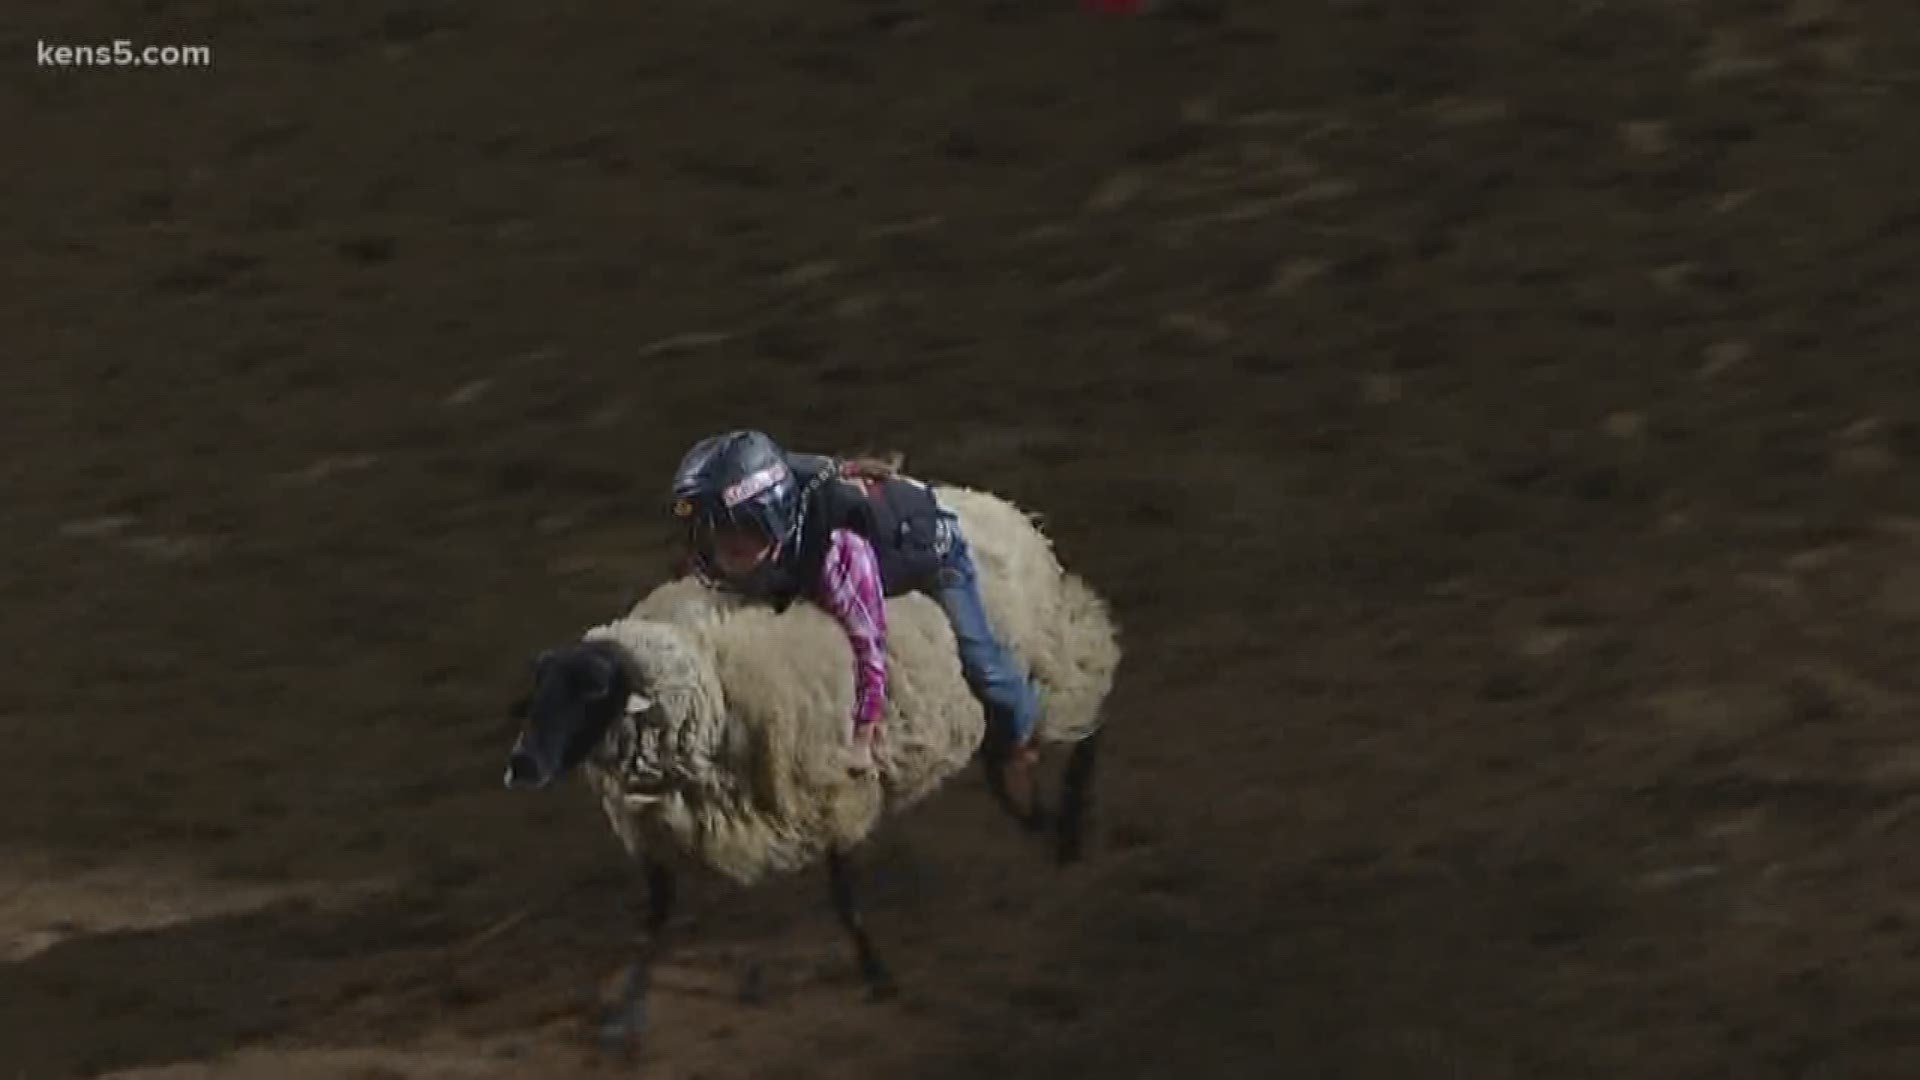 Rookie status at the San Antonio Rodeo meant nothin' to this 4-year-old girl